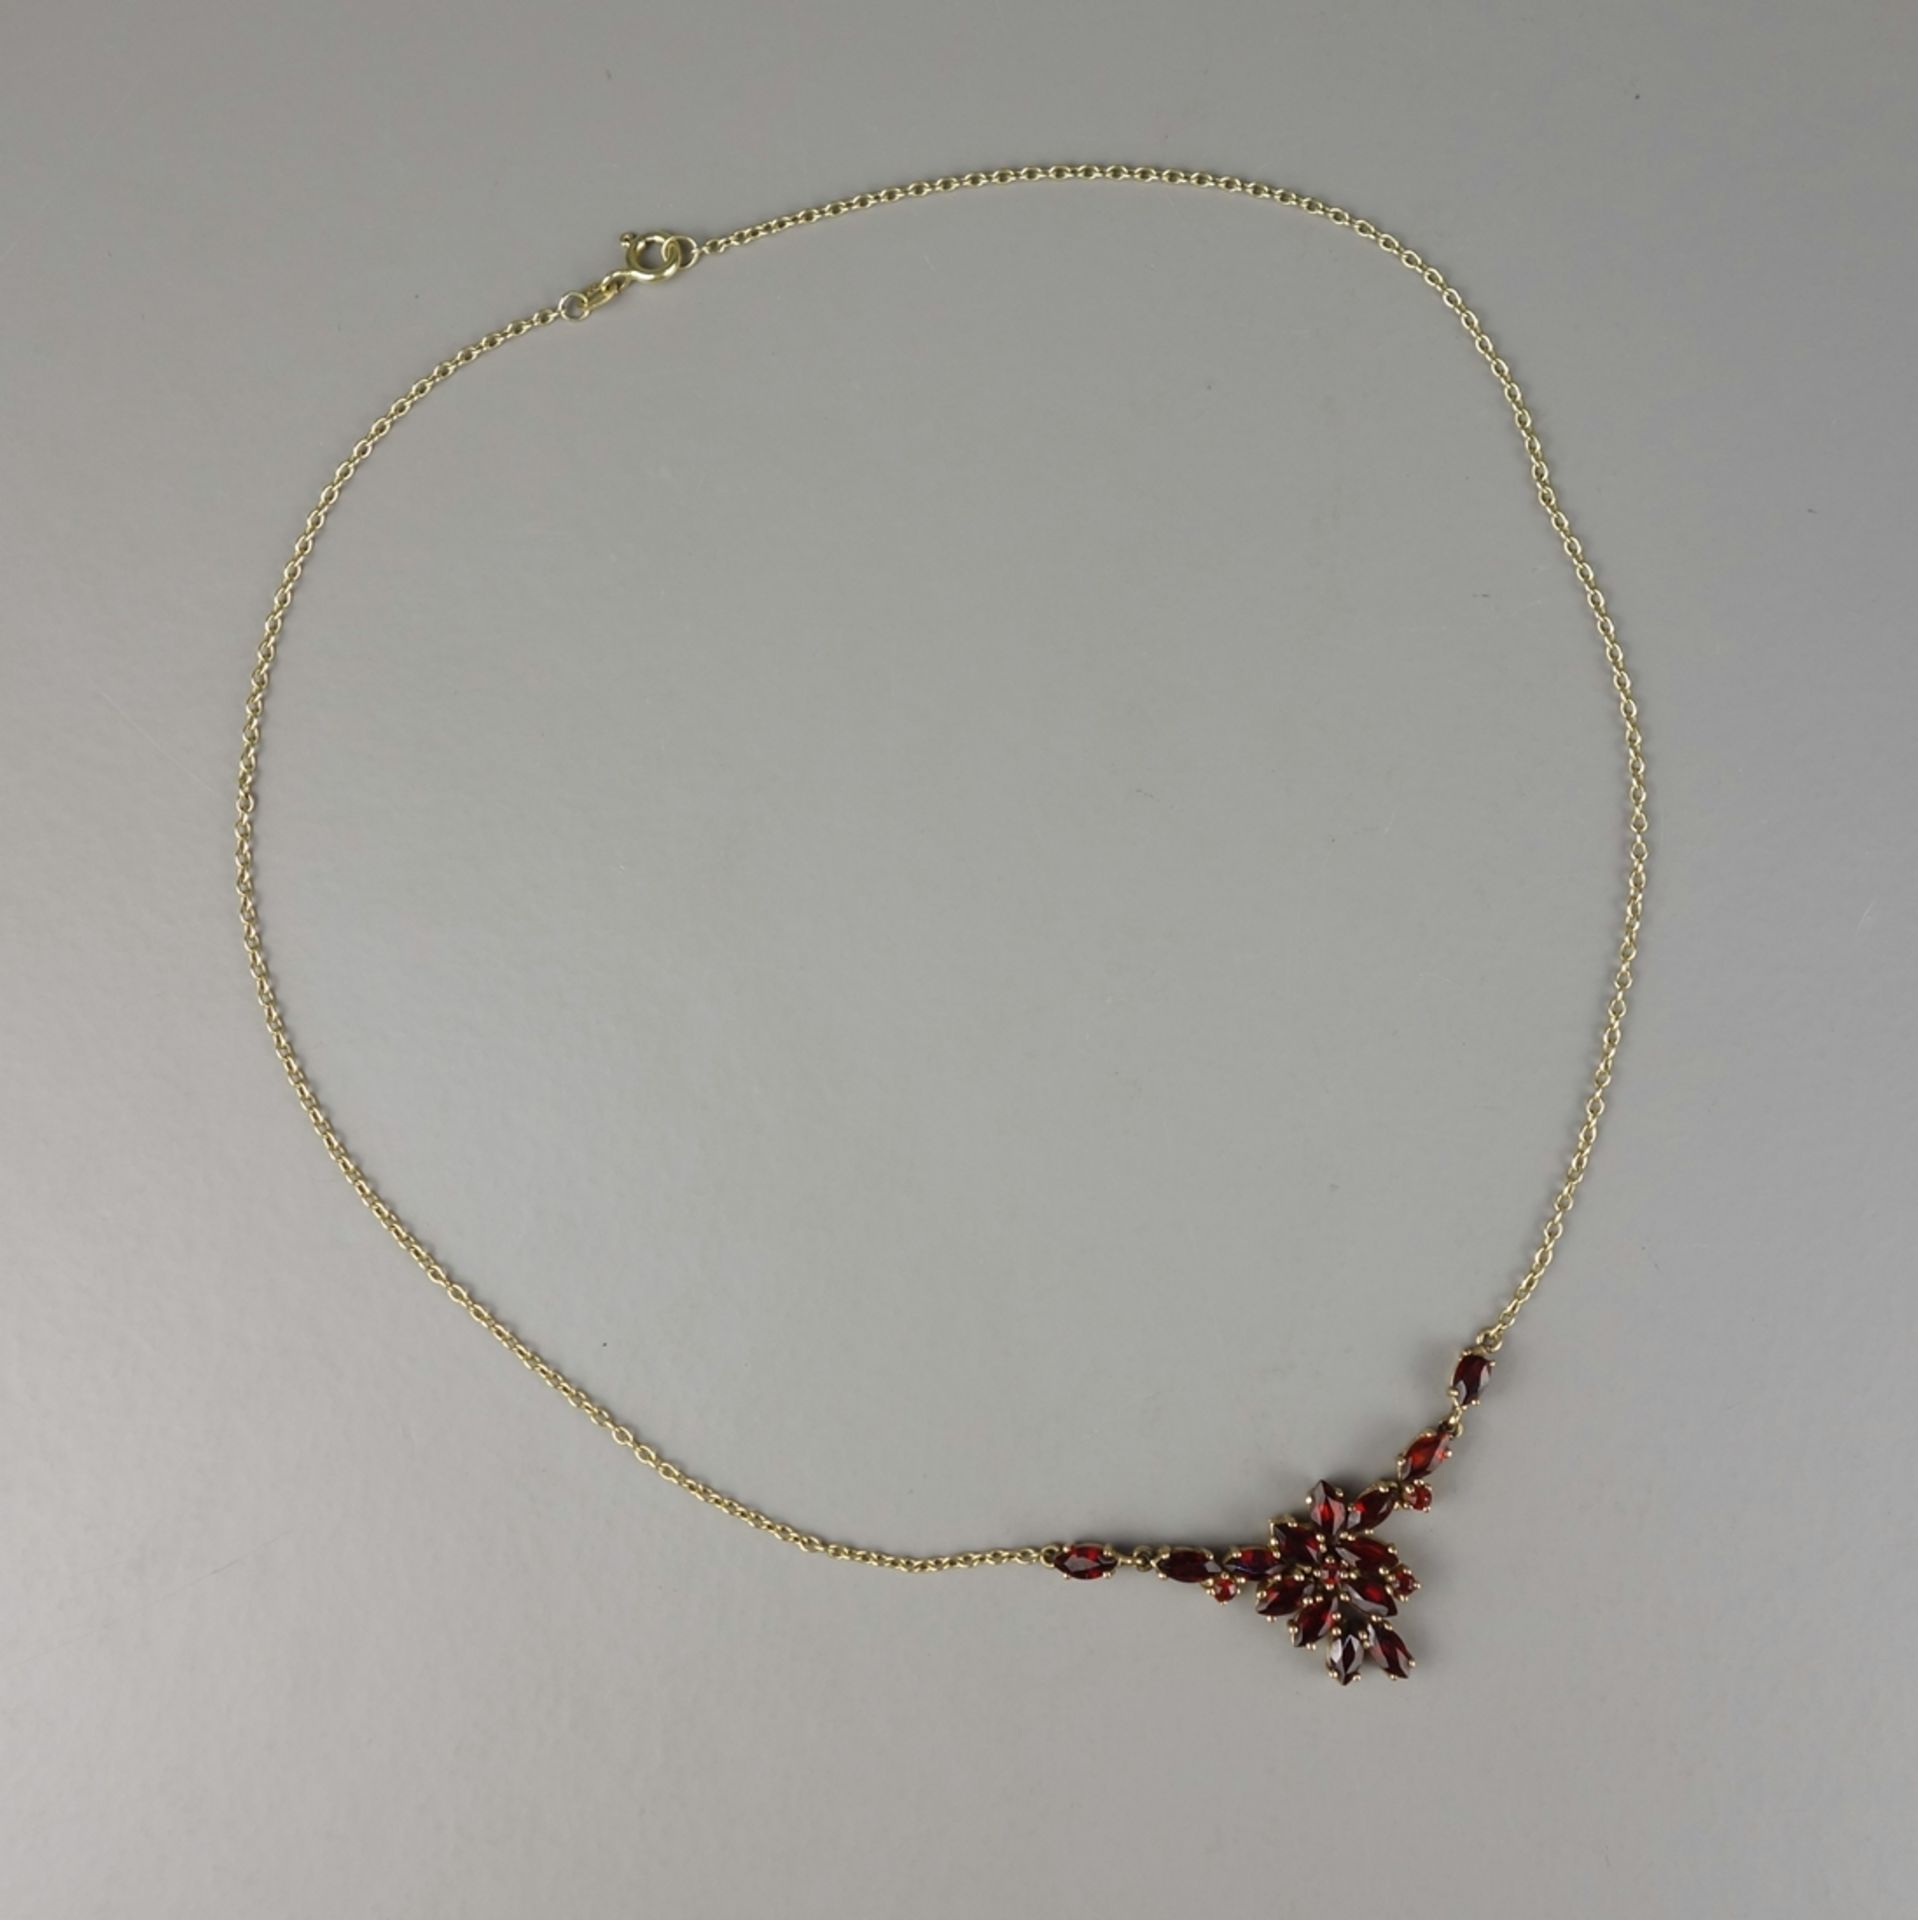 Garnet necklace, 8K gold, weight 5,88g, flower shaped middle part, anchor chain, l.approx.43cm - Image 2 of 3